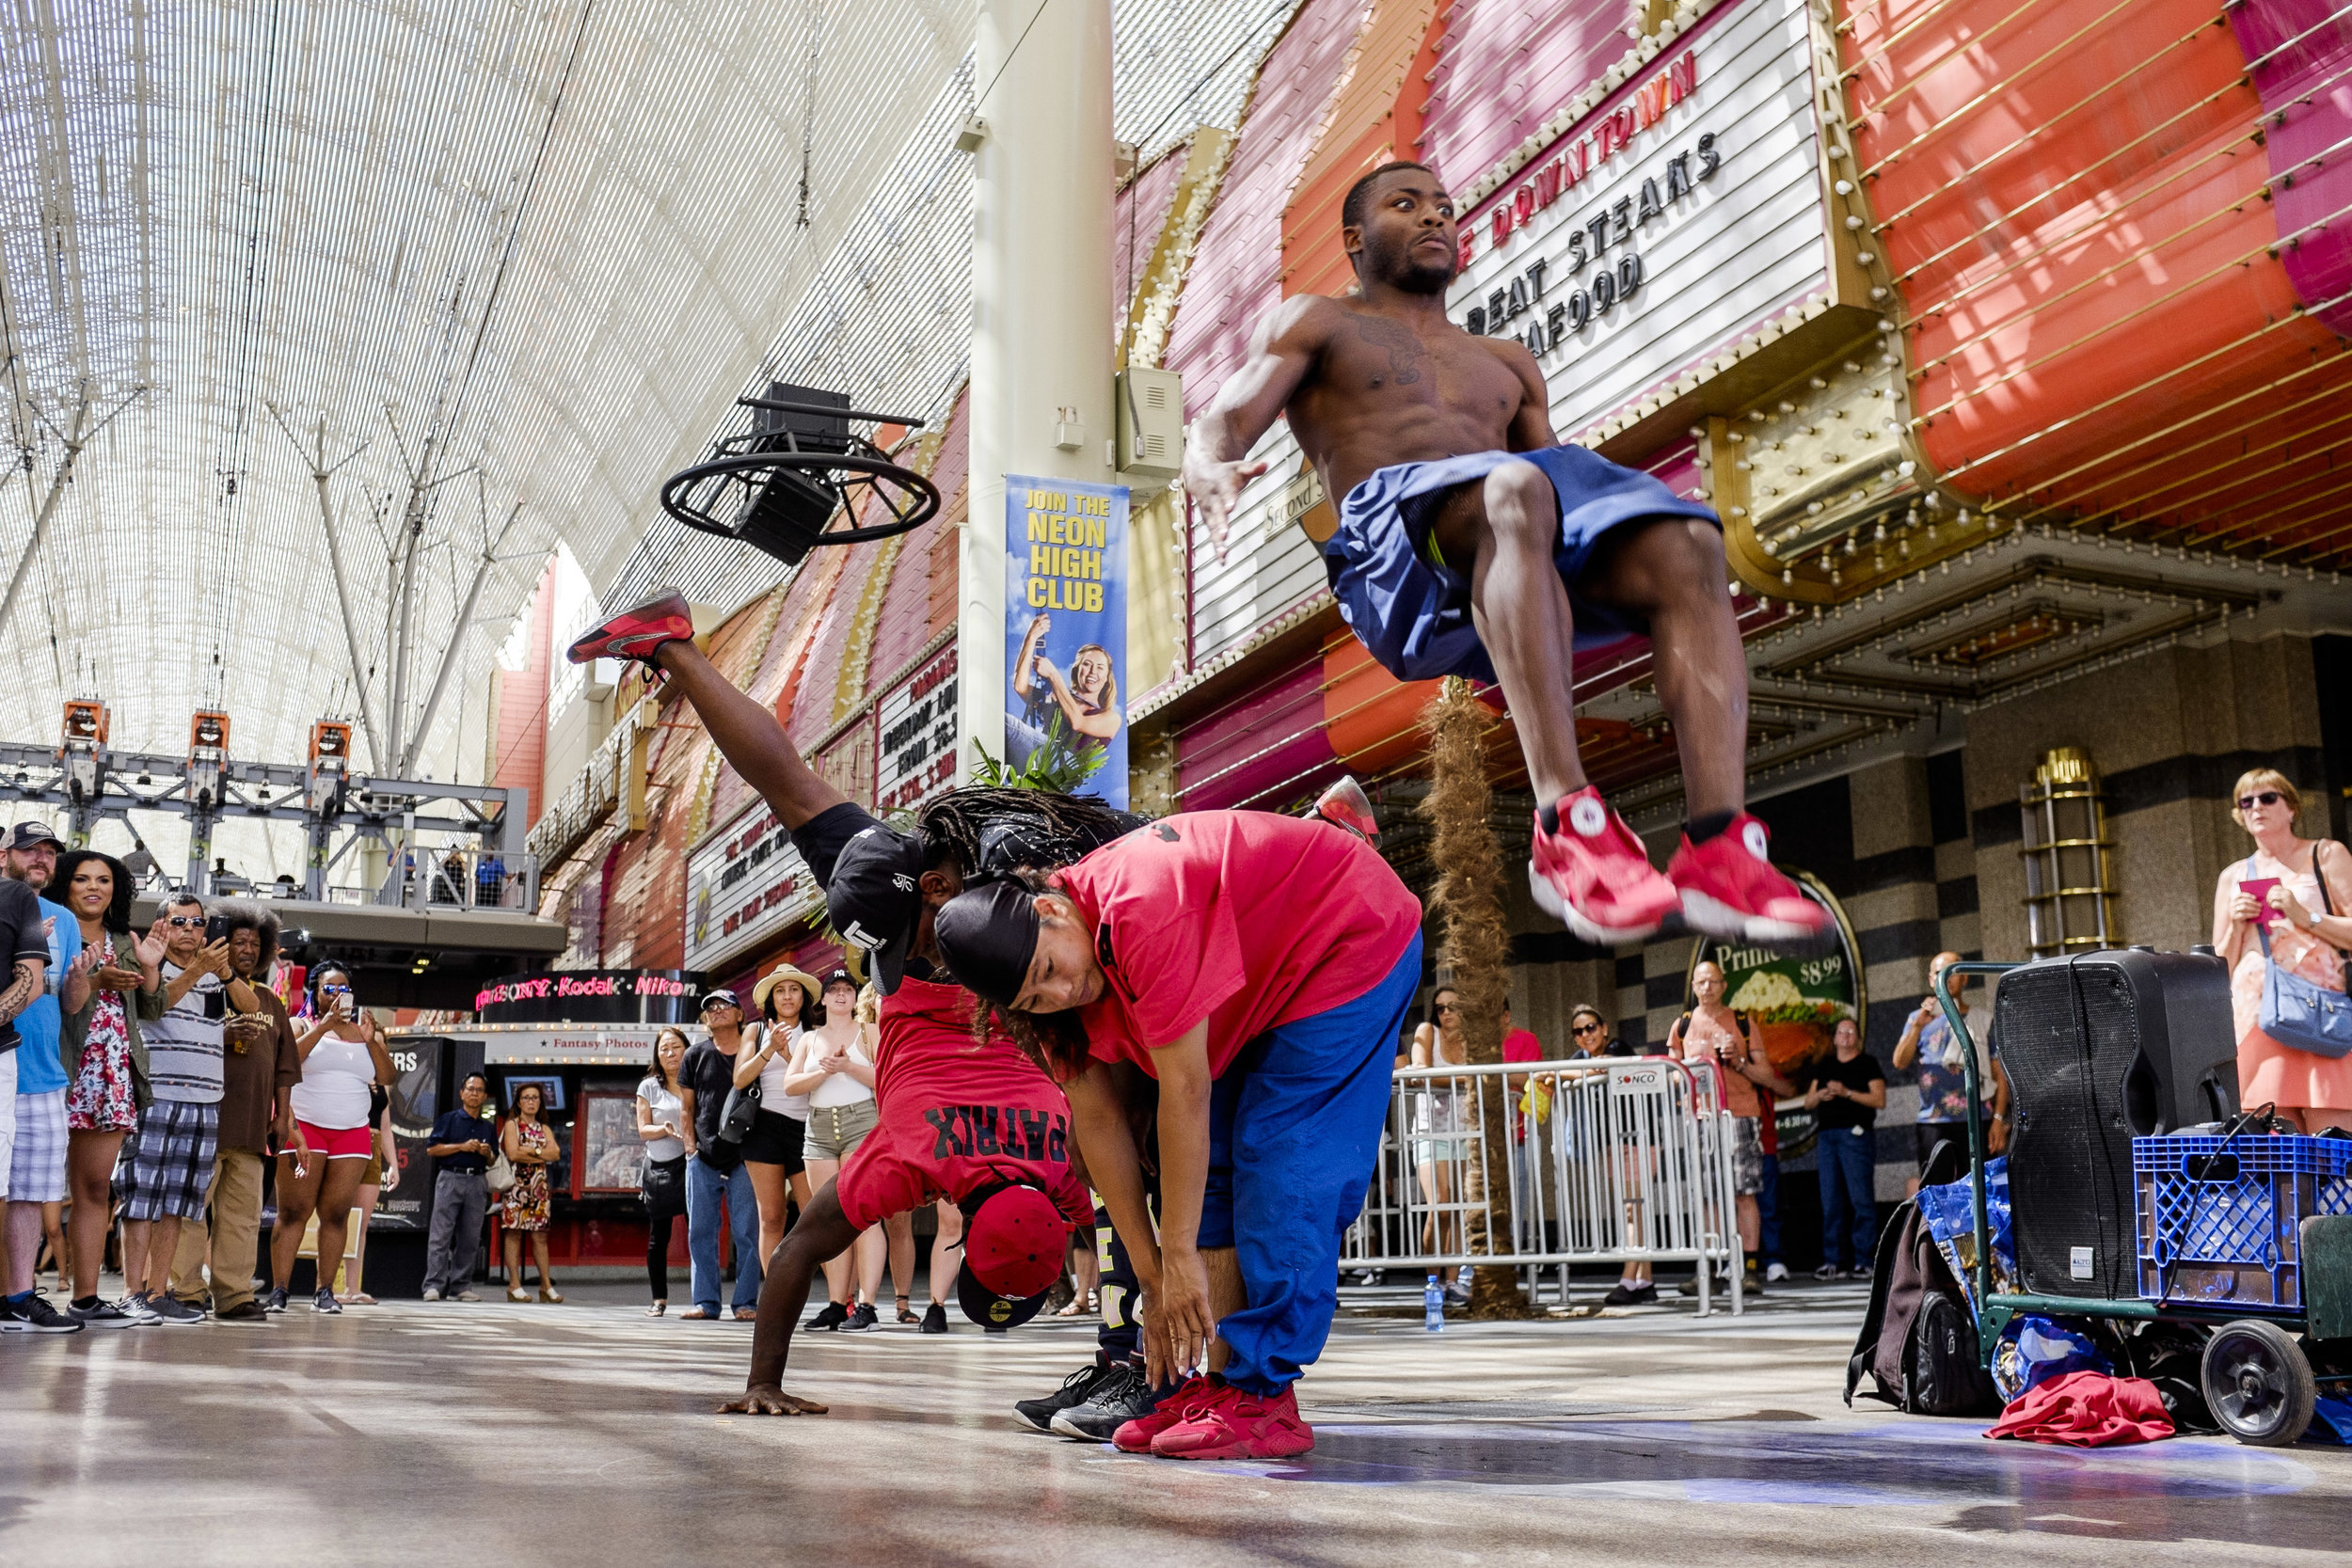  Members of the YAK (You Already Know) Dance Crew perform on Fremont Street on Thursday, May 25, 2017. Patrick Connolly Las Vegas Review-Journal @PConnPie 